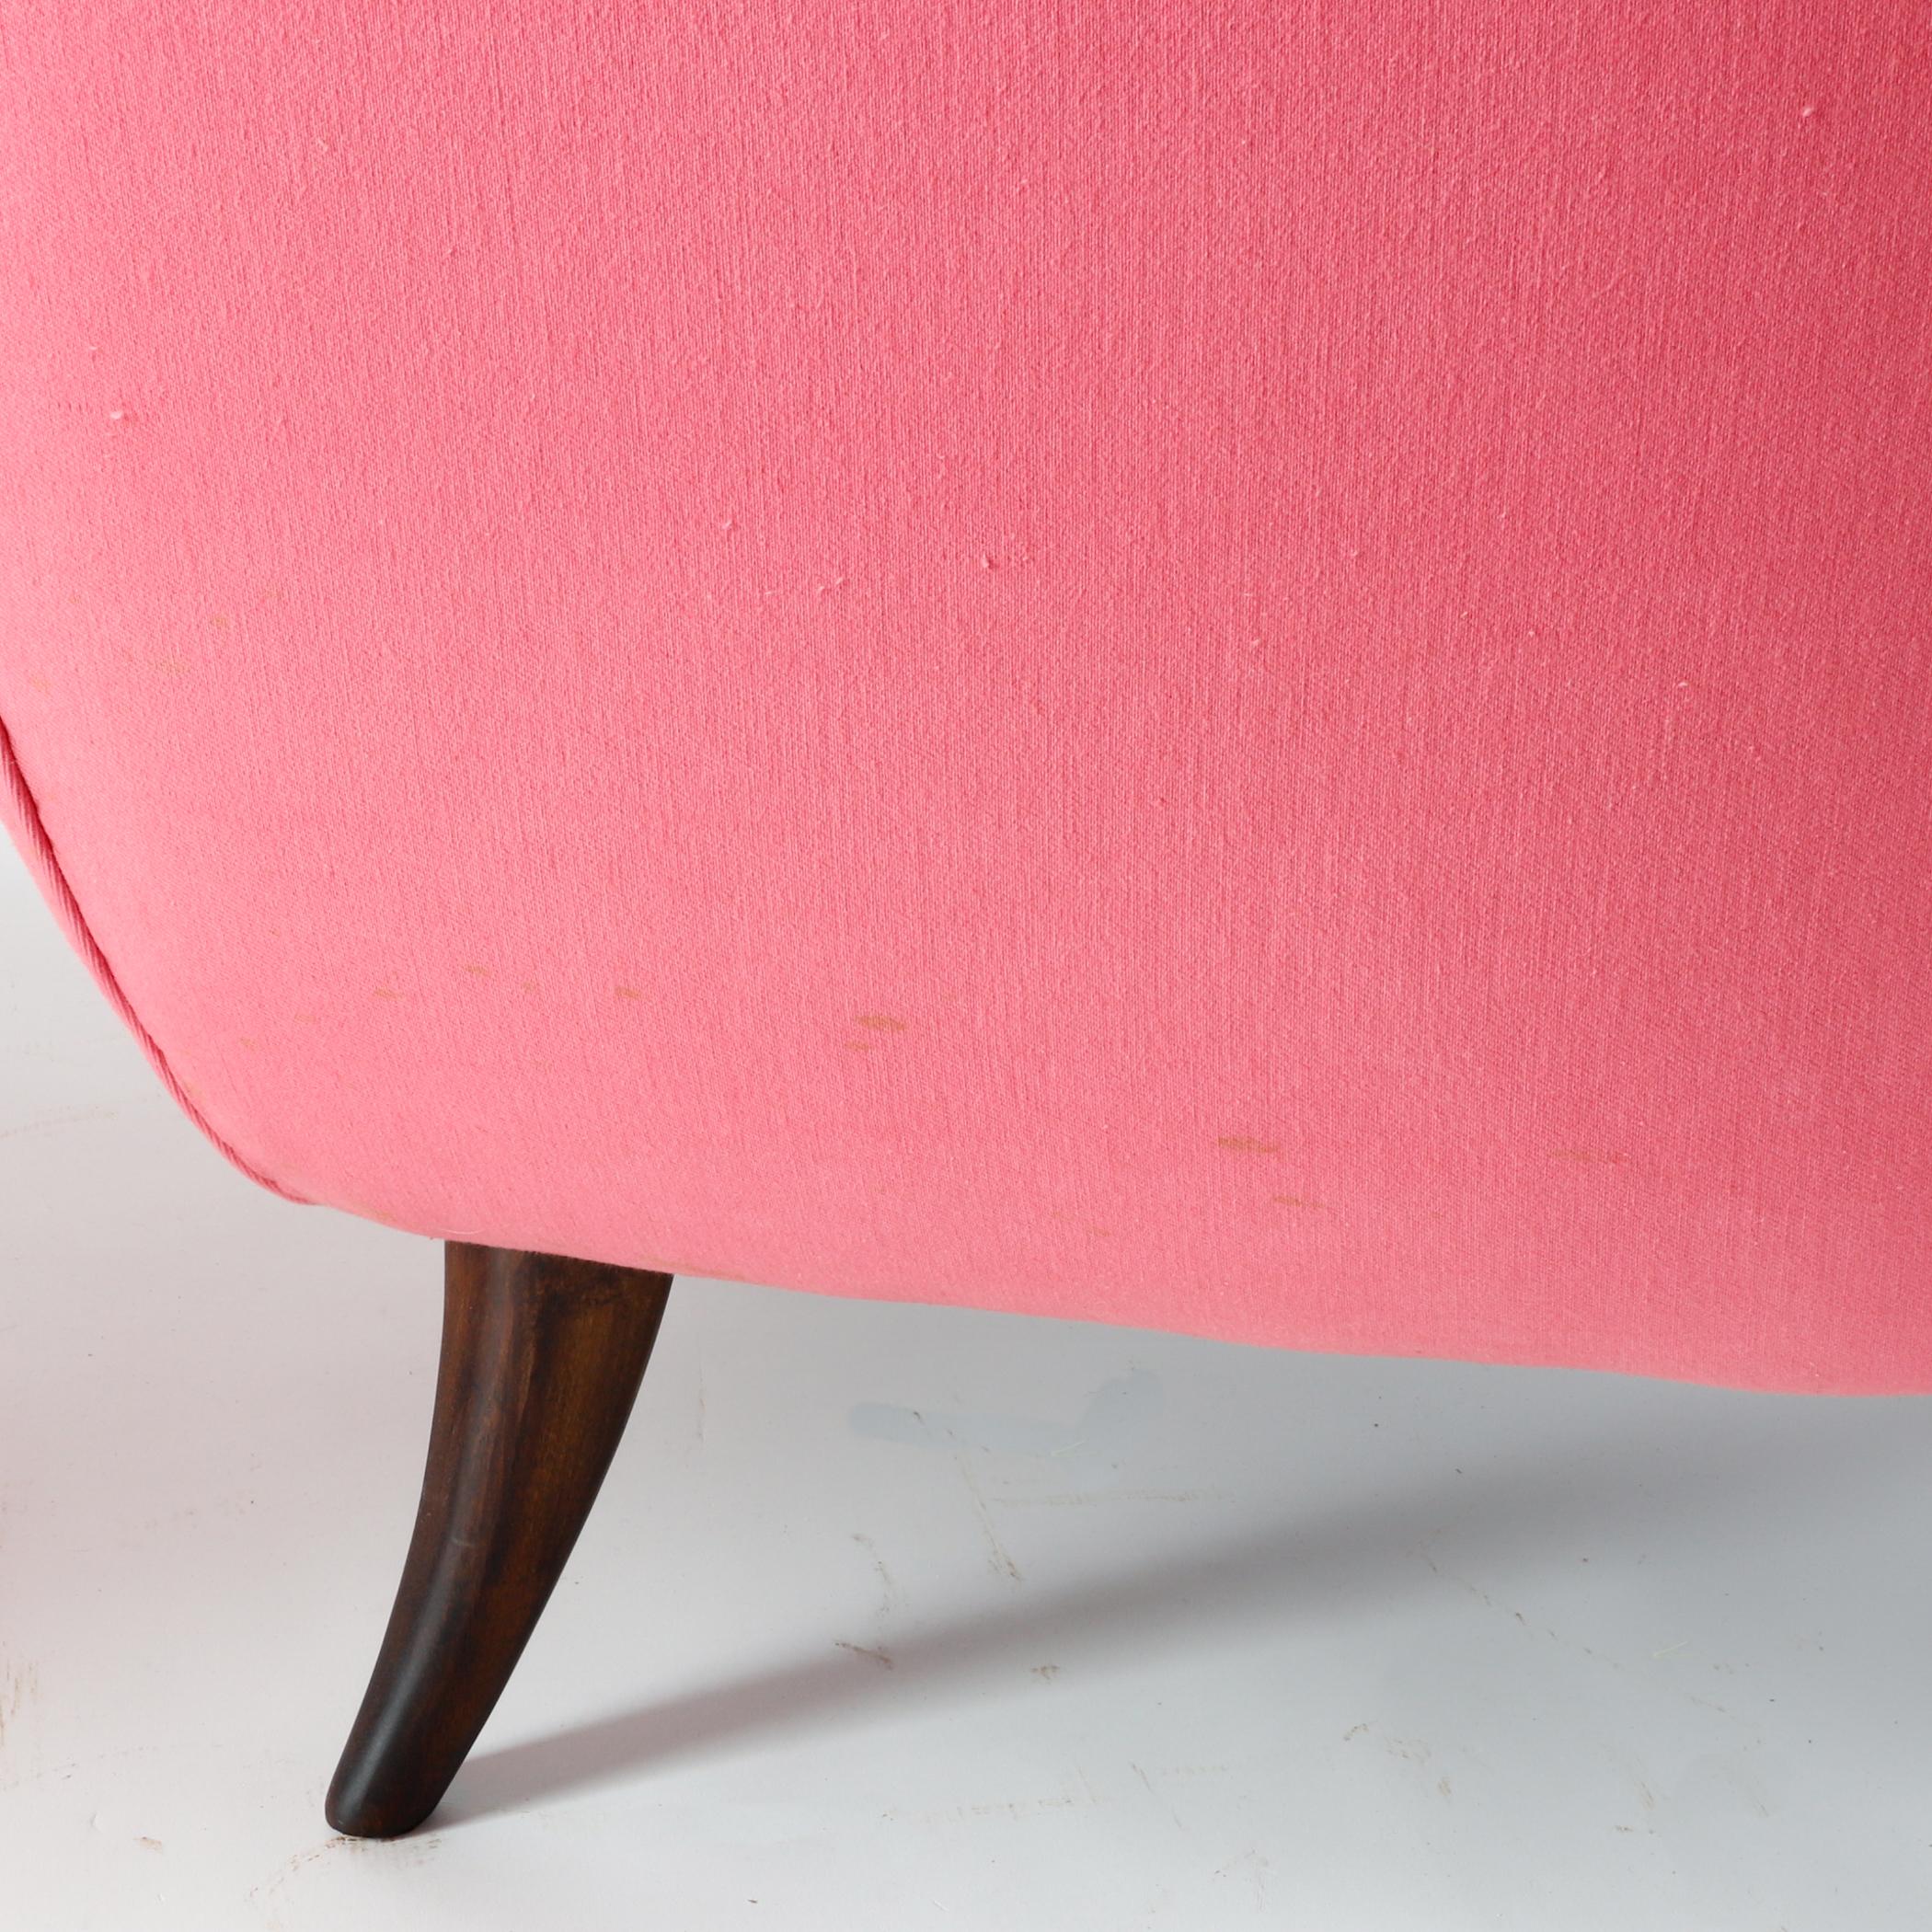 Pair of Ernst Schwadron Upholstered Lounge Chairs, 1940s, Bright Pink For Sale 4